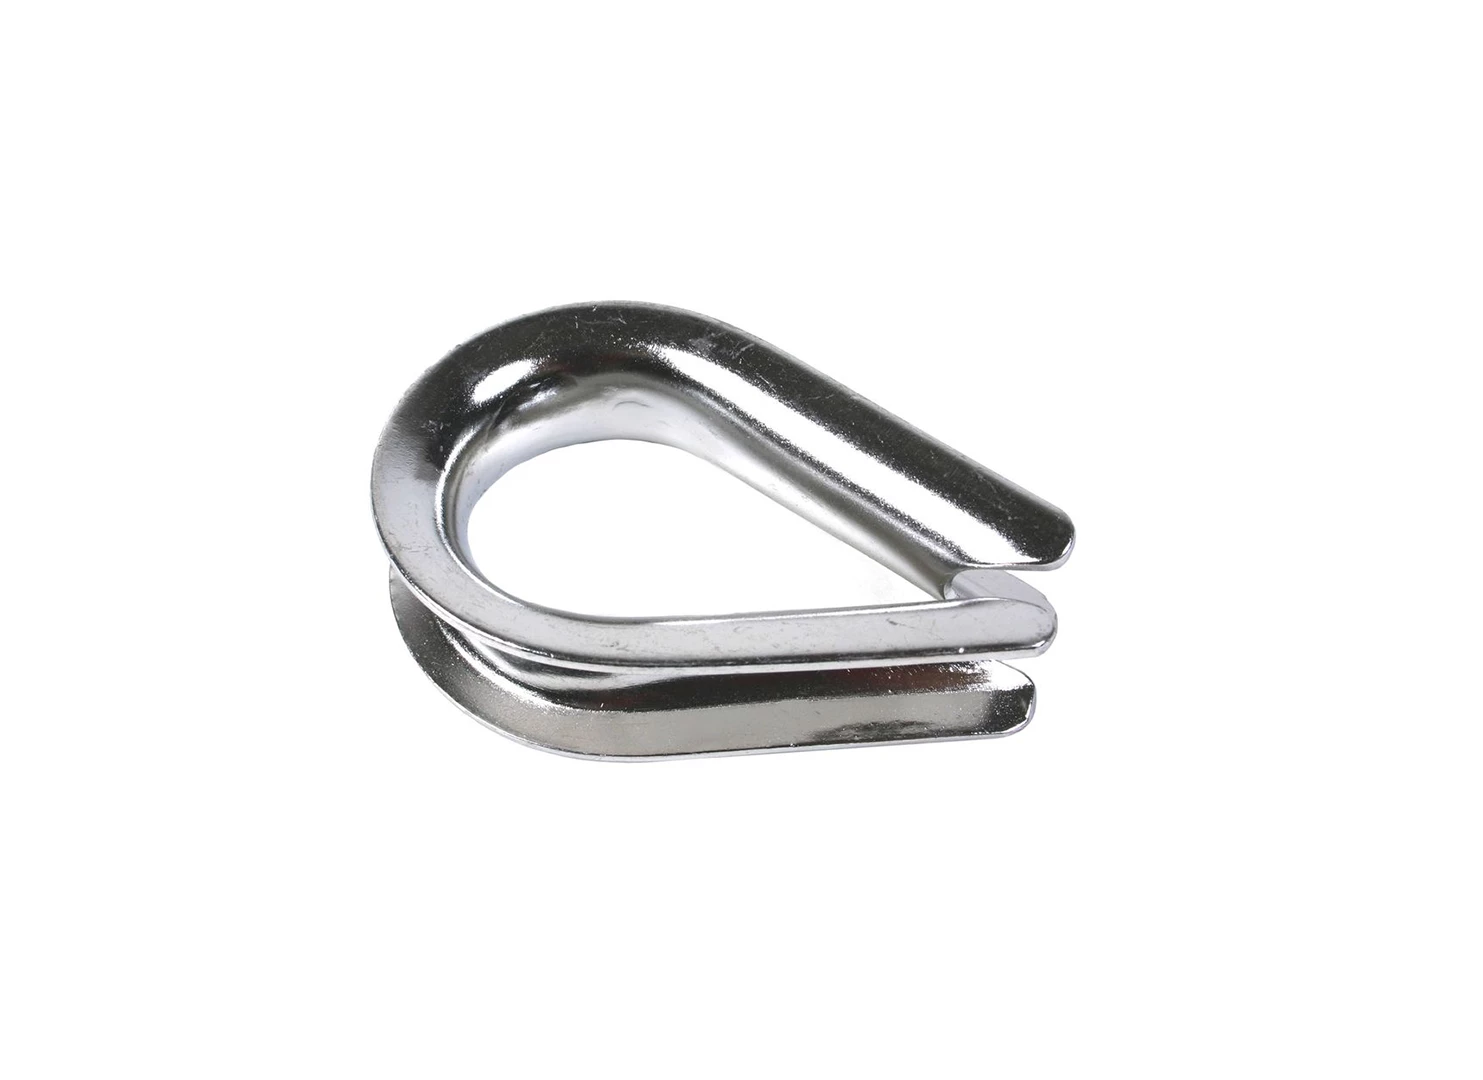 Product: Thimble 23-24mm